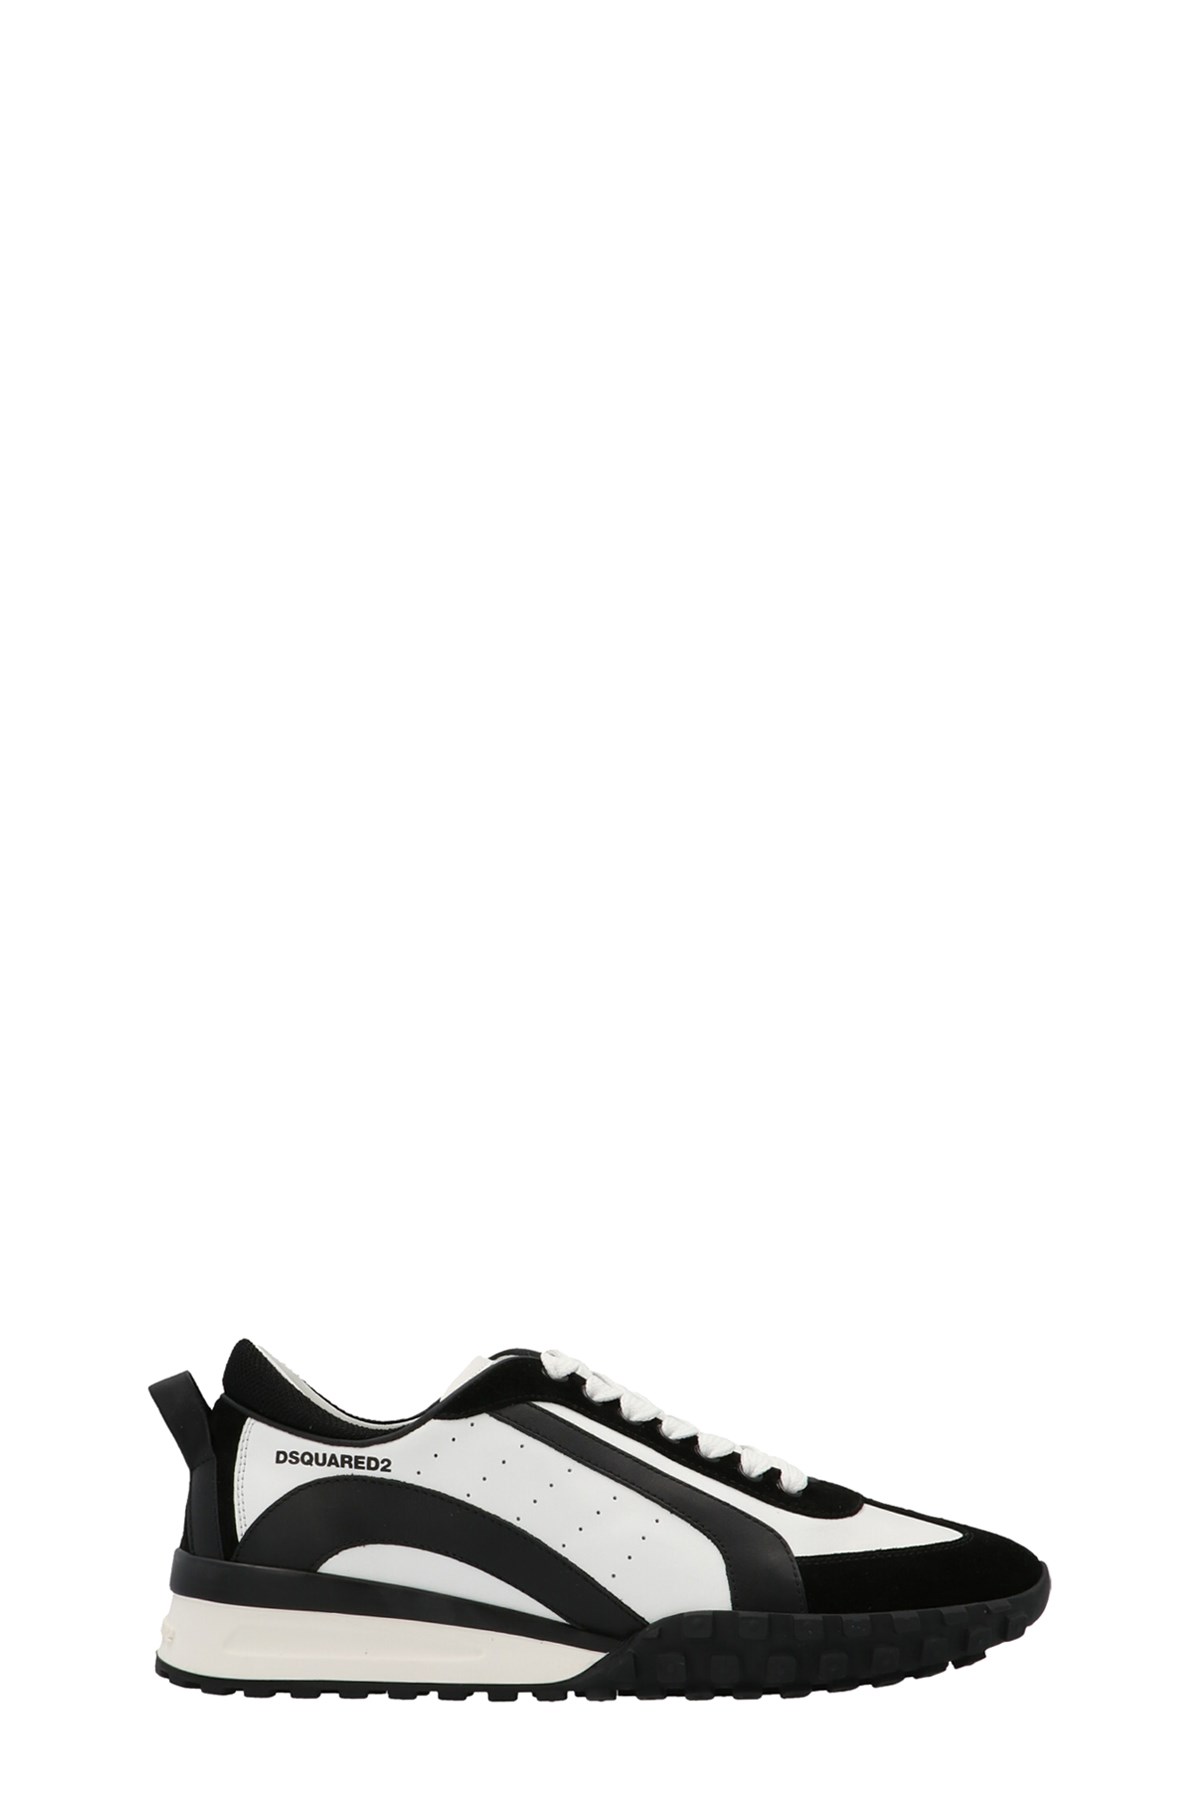 DSQUARED2 'Legend’ Sneakers